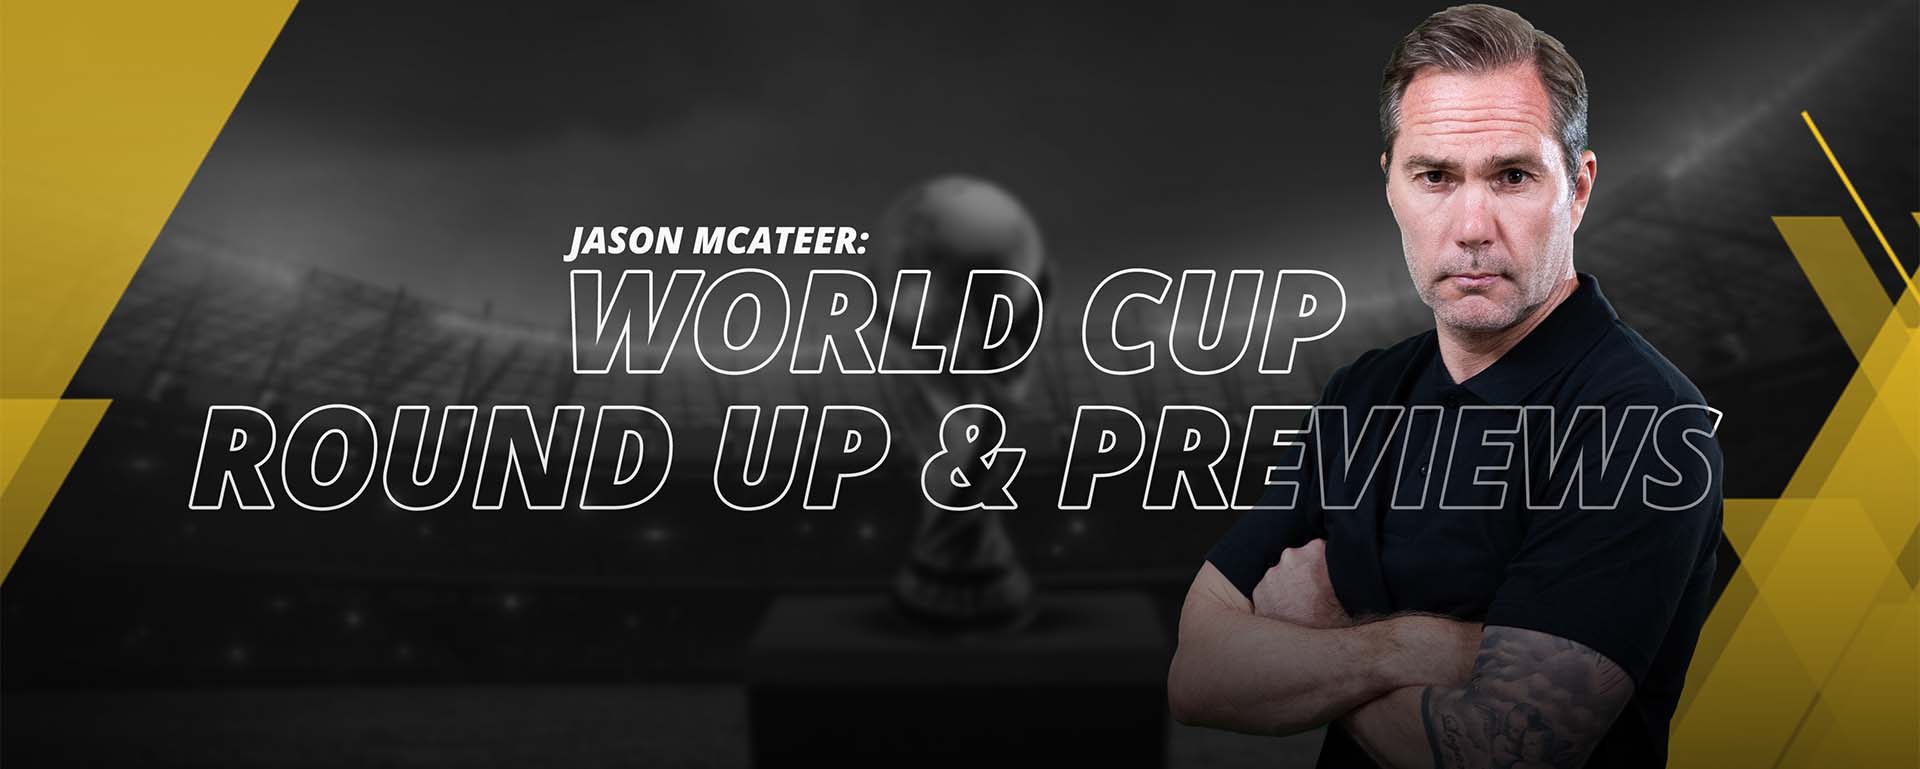 JASON MCATEER WORLD CUP ROUND UP AND PREVIEWS